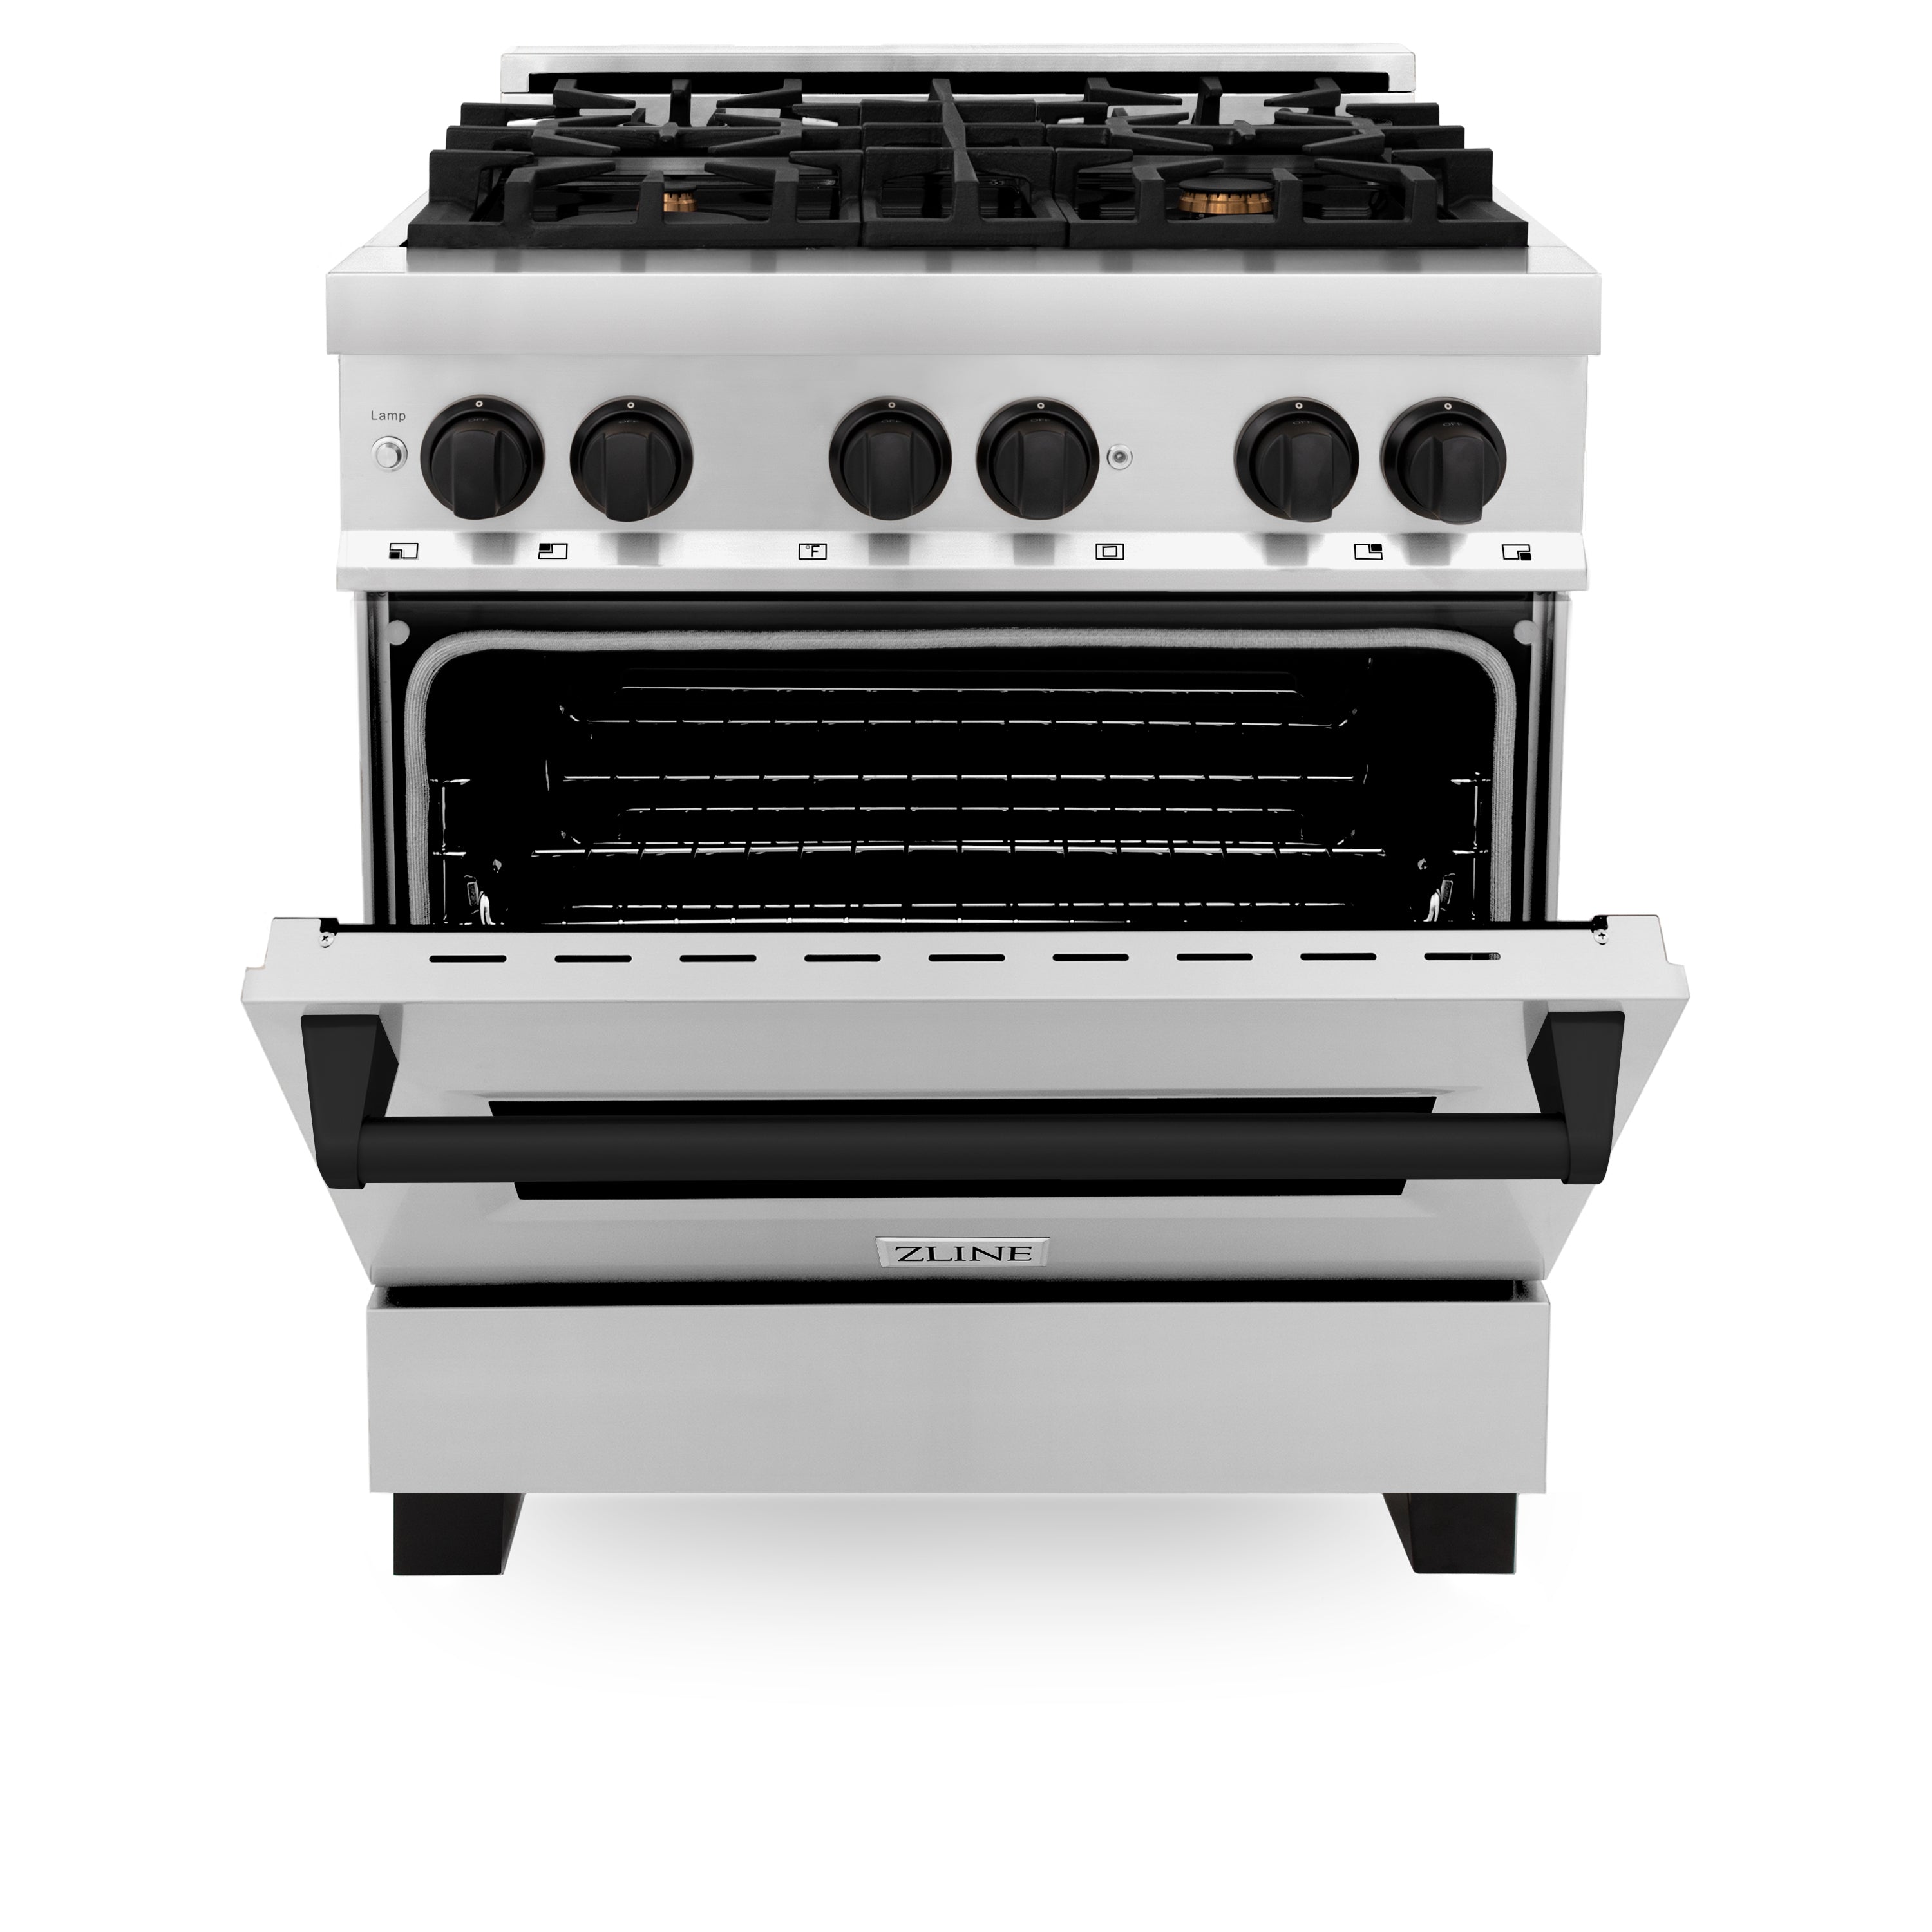 ZLINE Autograph Edition 30" 4.0 cu. ft. Dual Fuel Range with Gas Stove and Electric Oven in Stainless Steel with Accents (RAZ-30-MB)